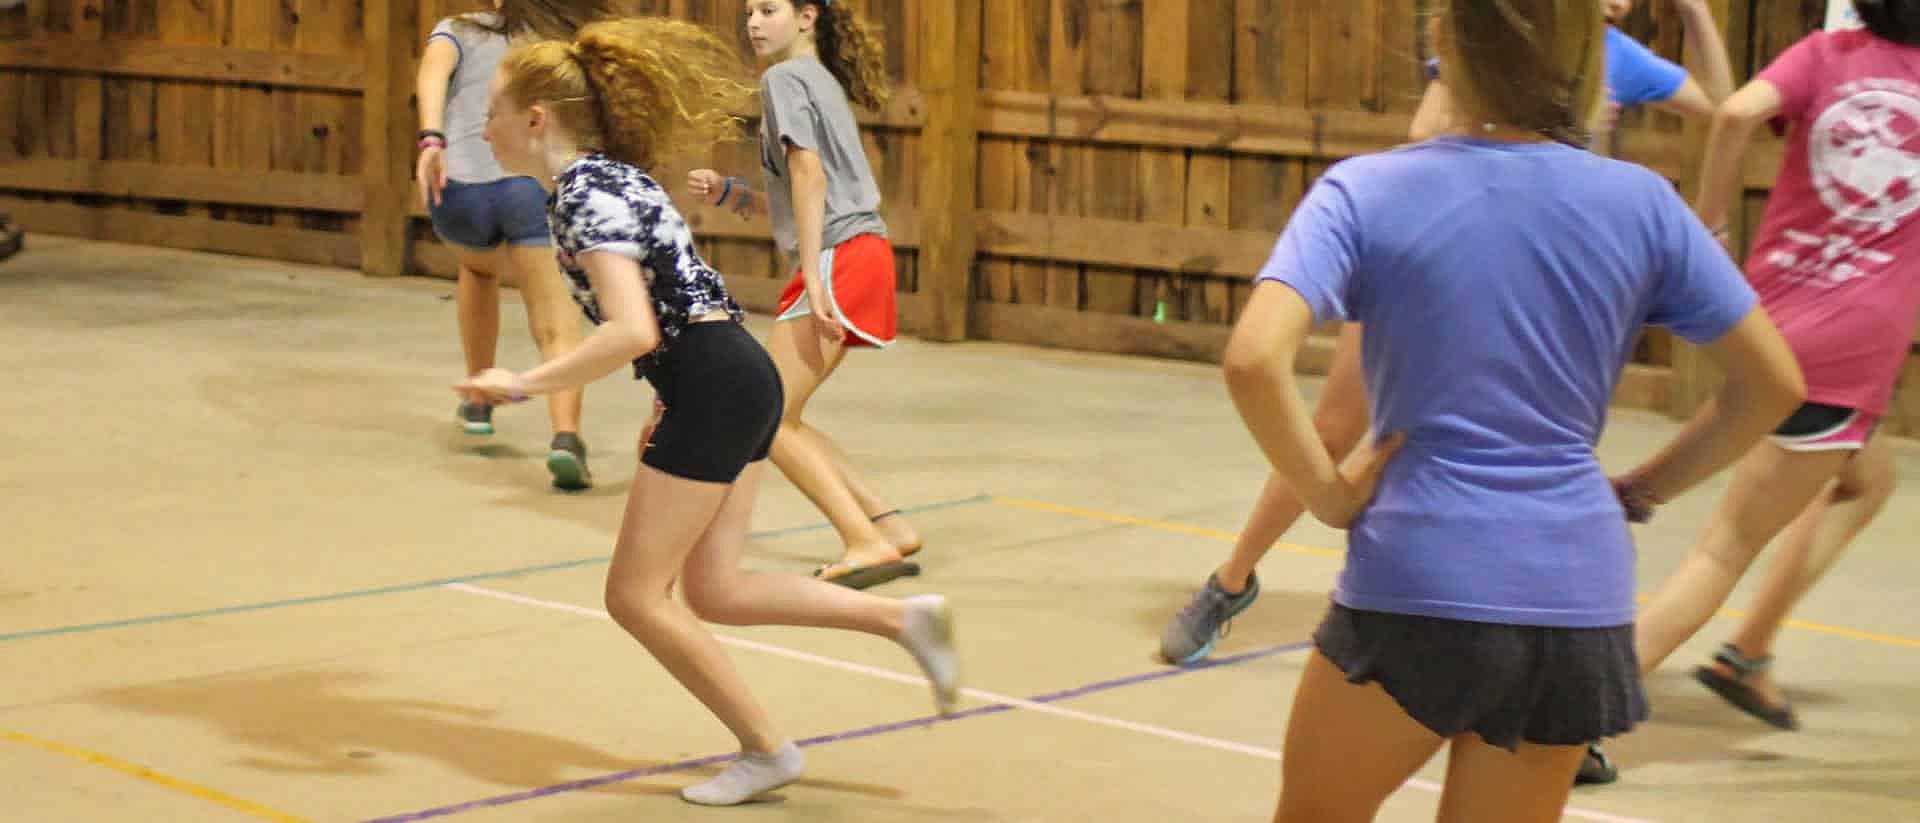 Four Square - Great Camp Games